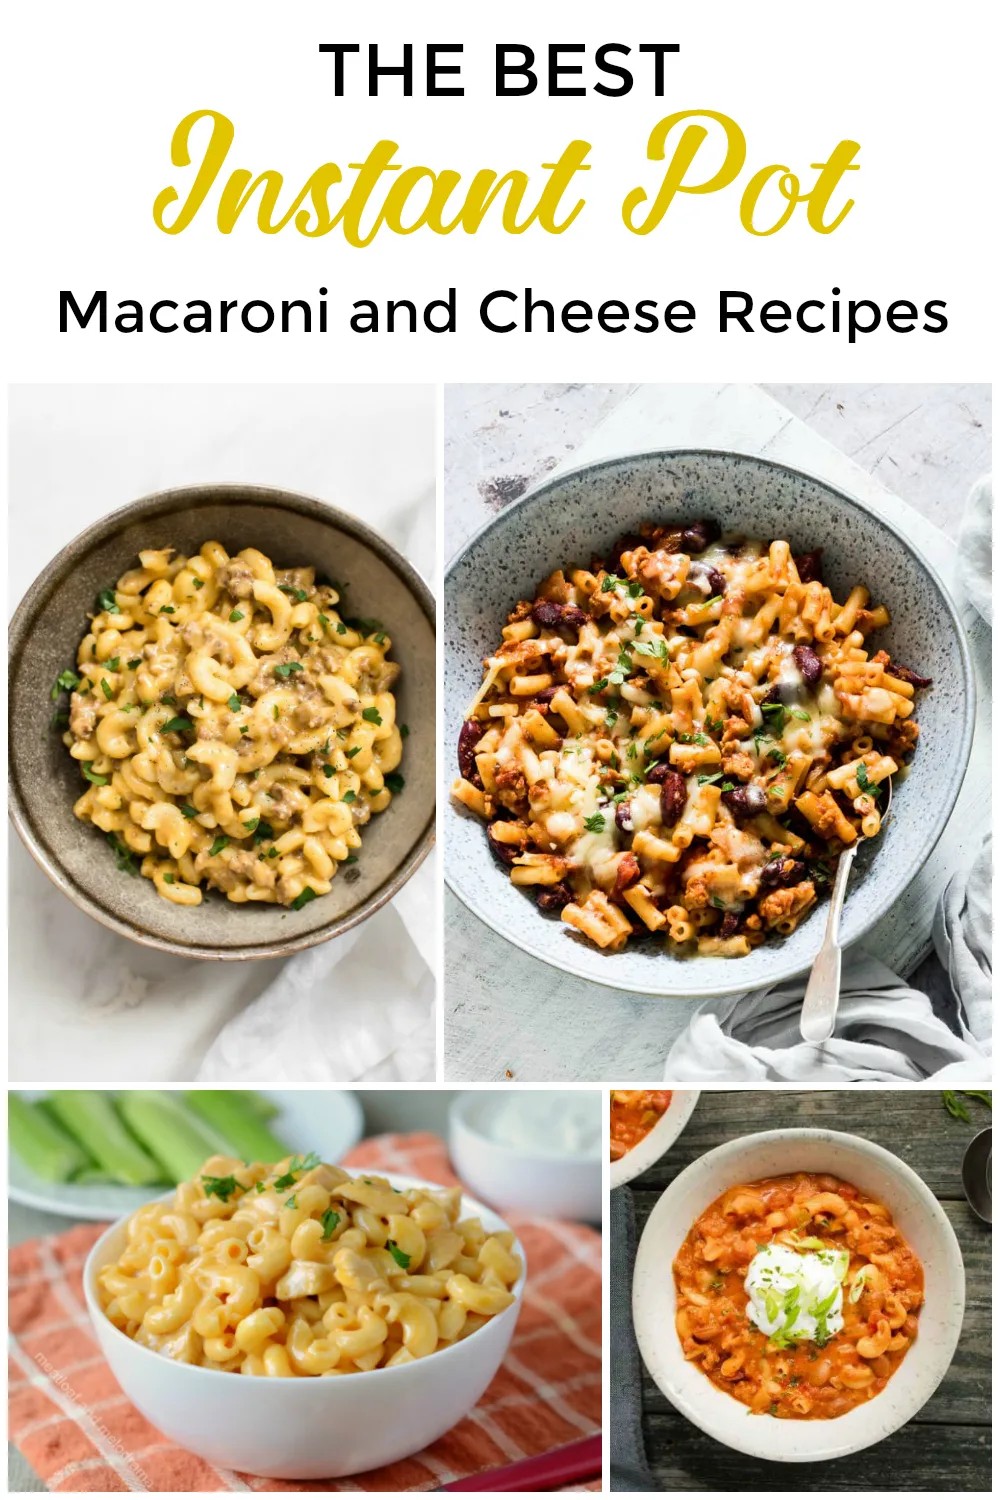 Best Instant Pot Macaroni and Cheese Recipes